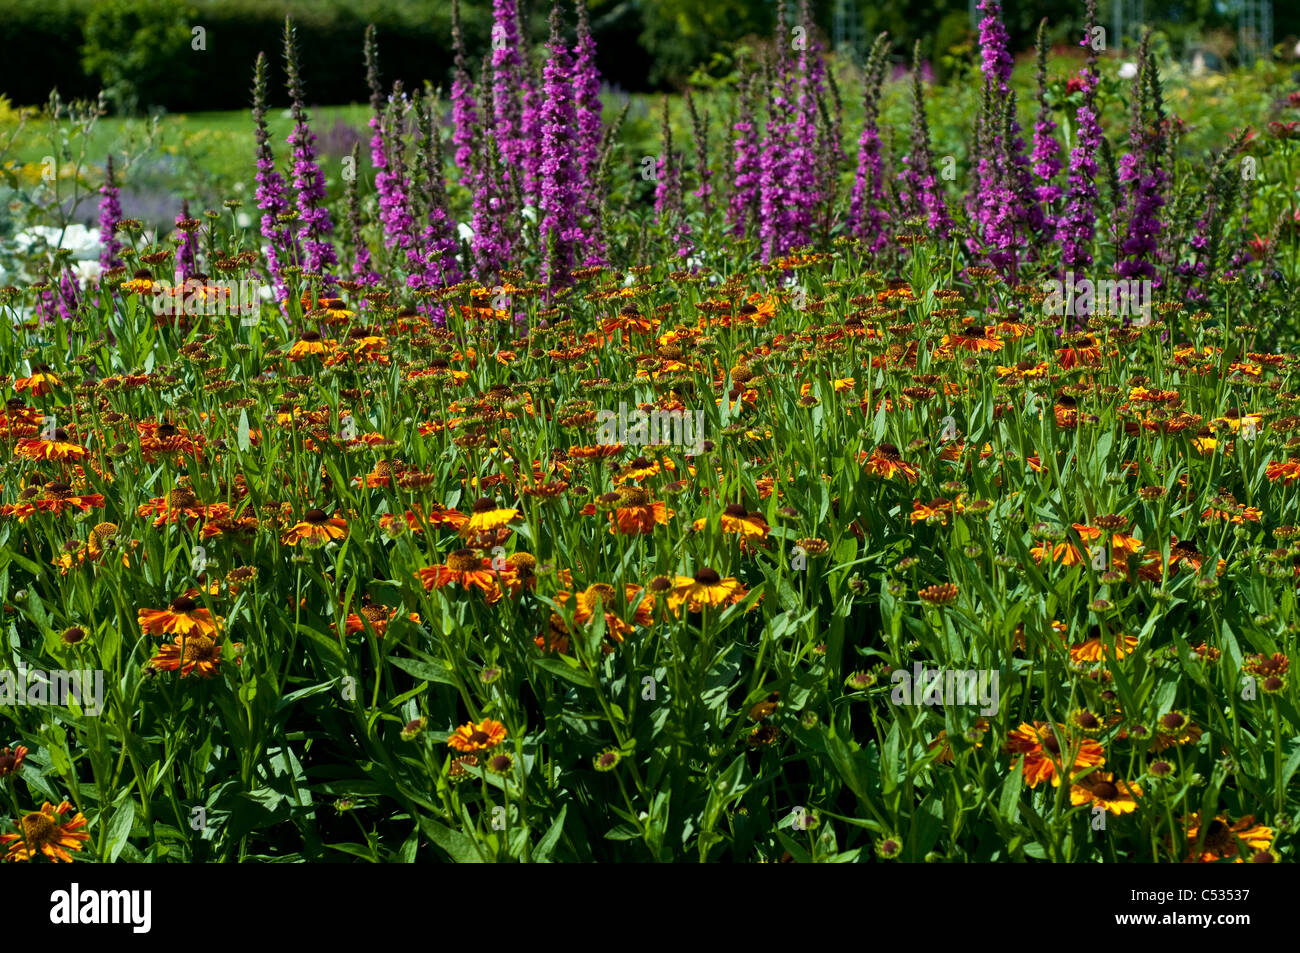 Helenium 'Waltraut' and Lythrum salicaria 'Feuerkerze' - Loosestrife in the background Stock Photo